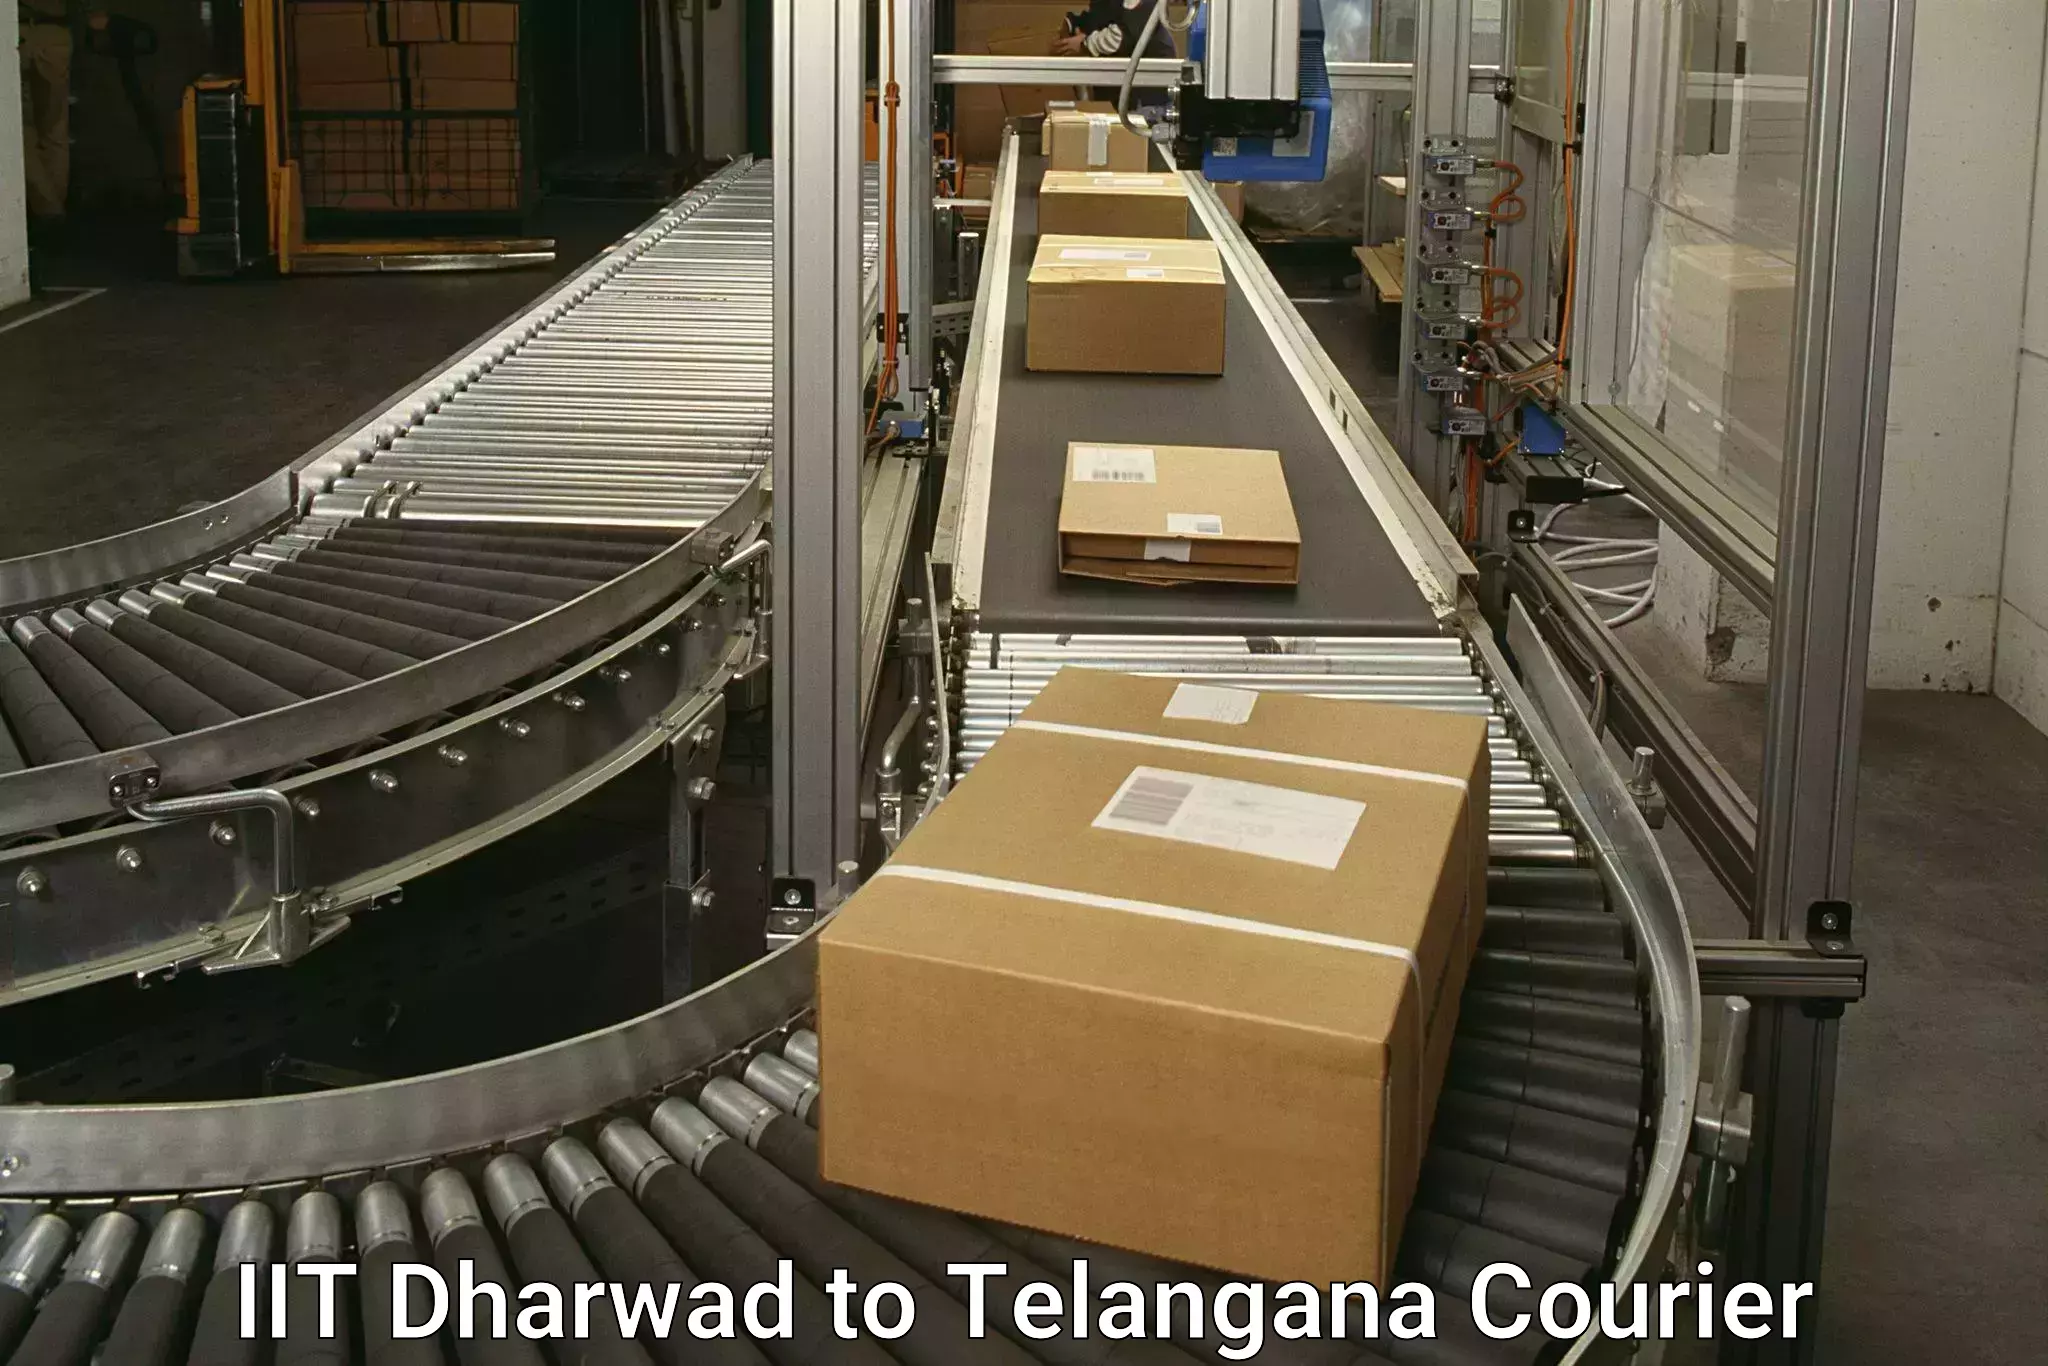 Return courier service IIT Dharwad to Alair